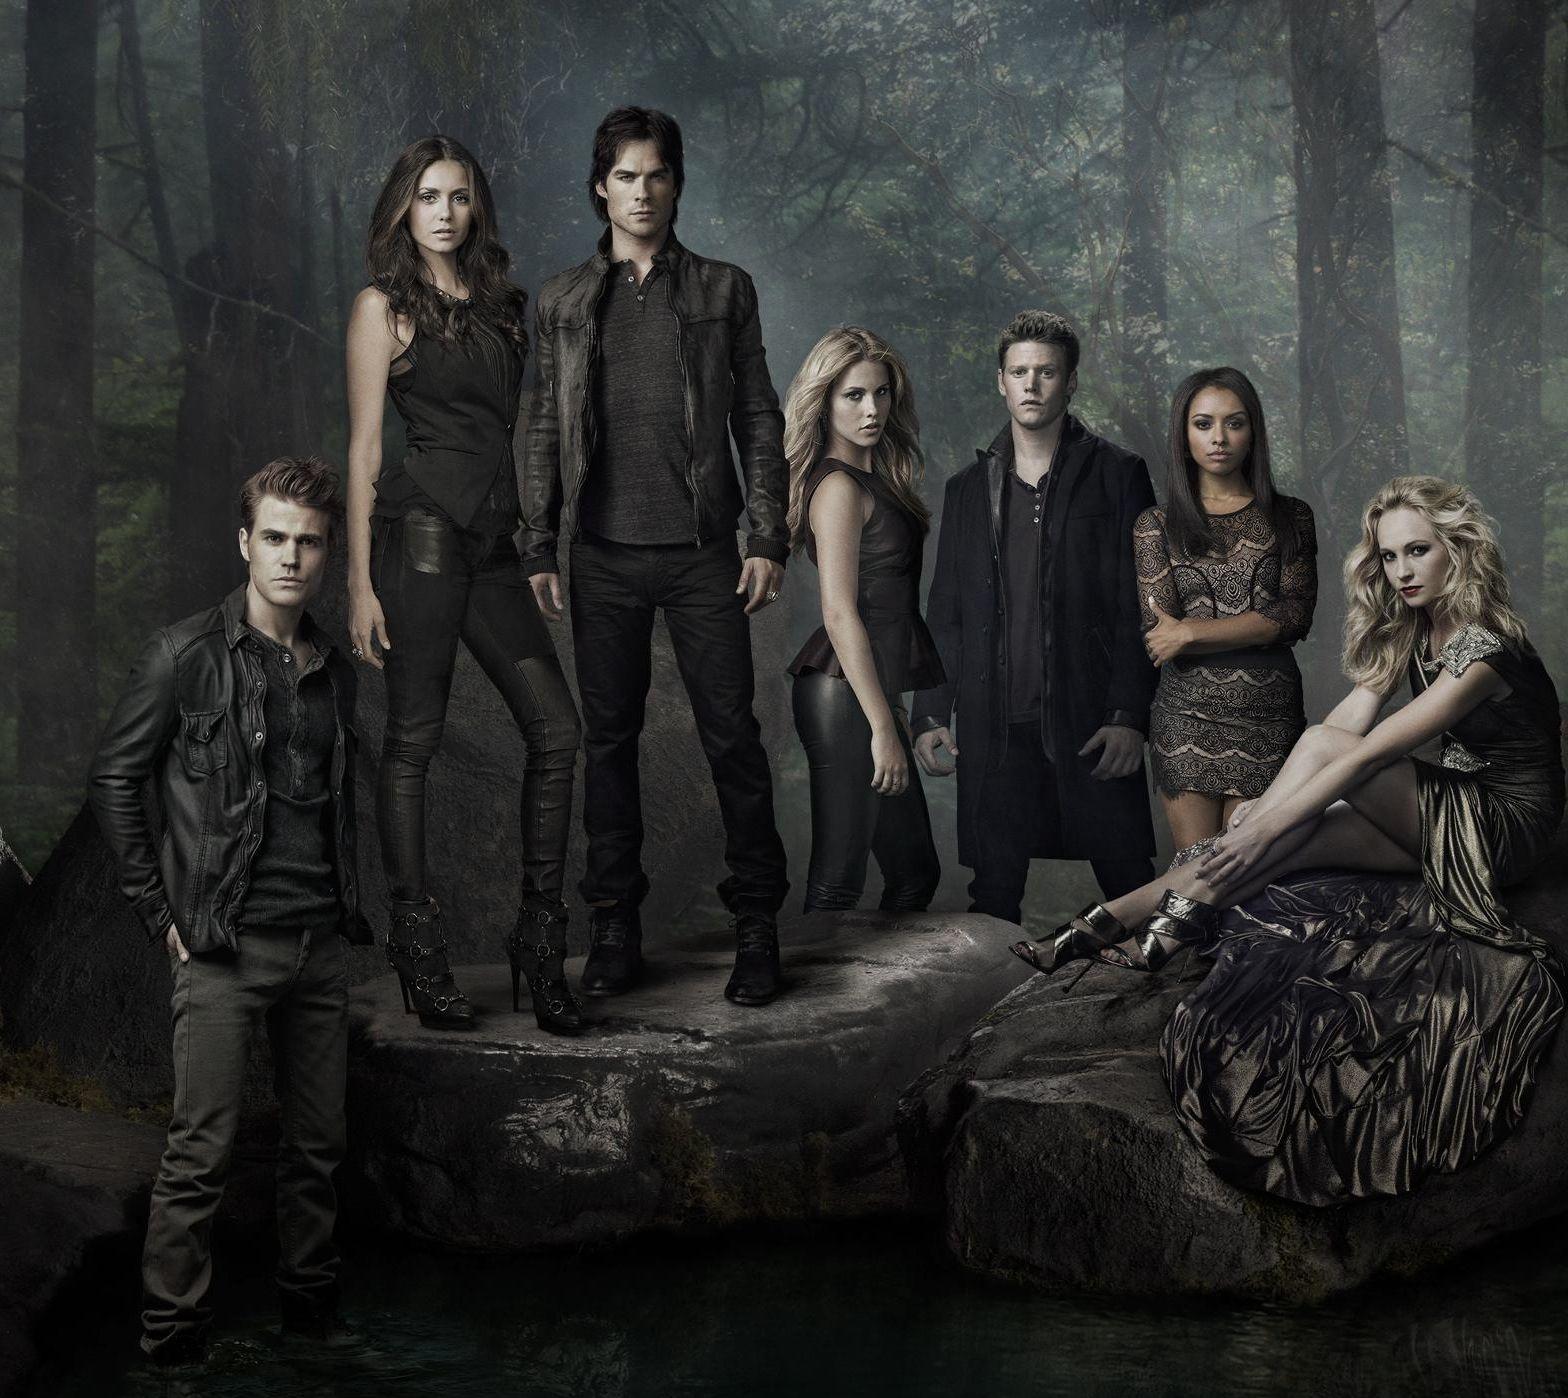 Collection of The Vampire Diaries Wallpaper on HDWallpaper 1568